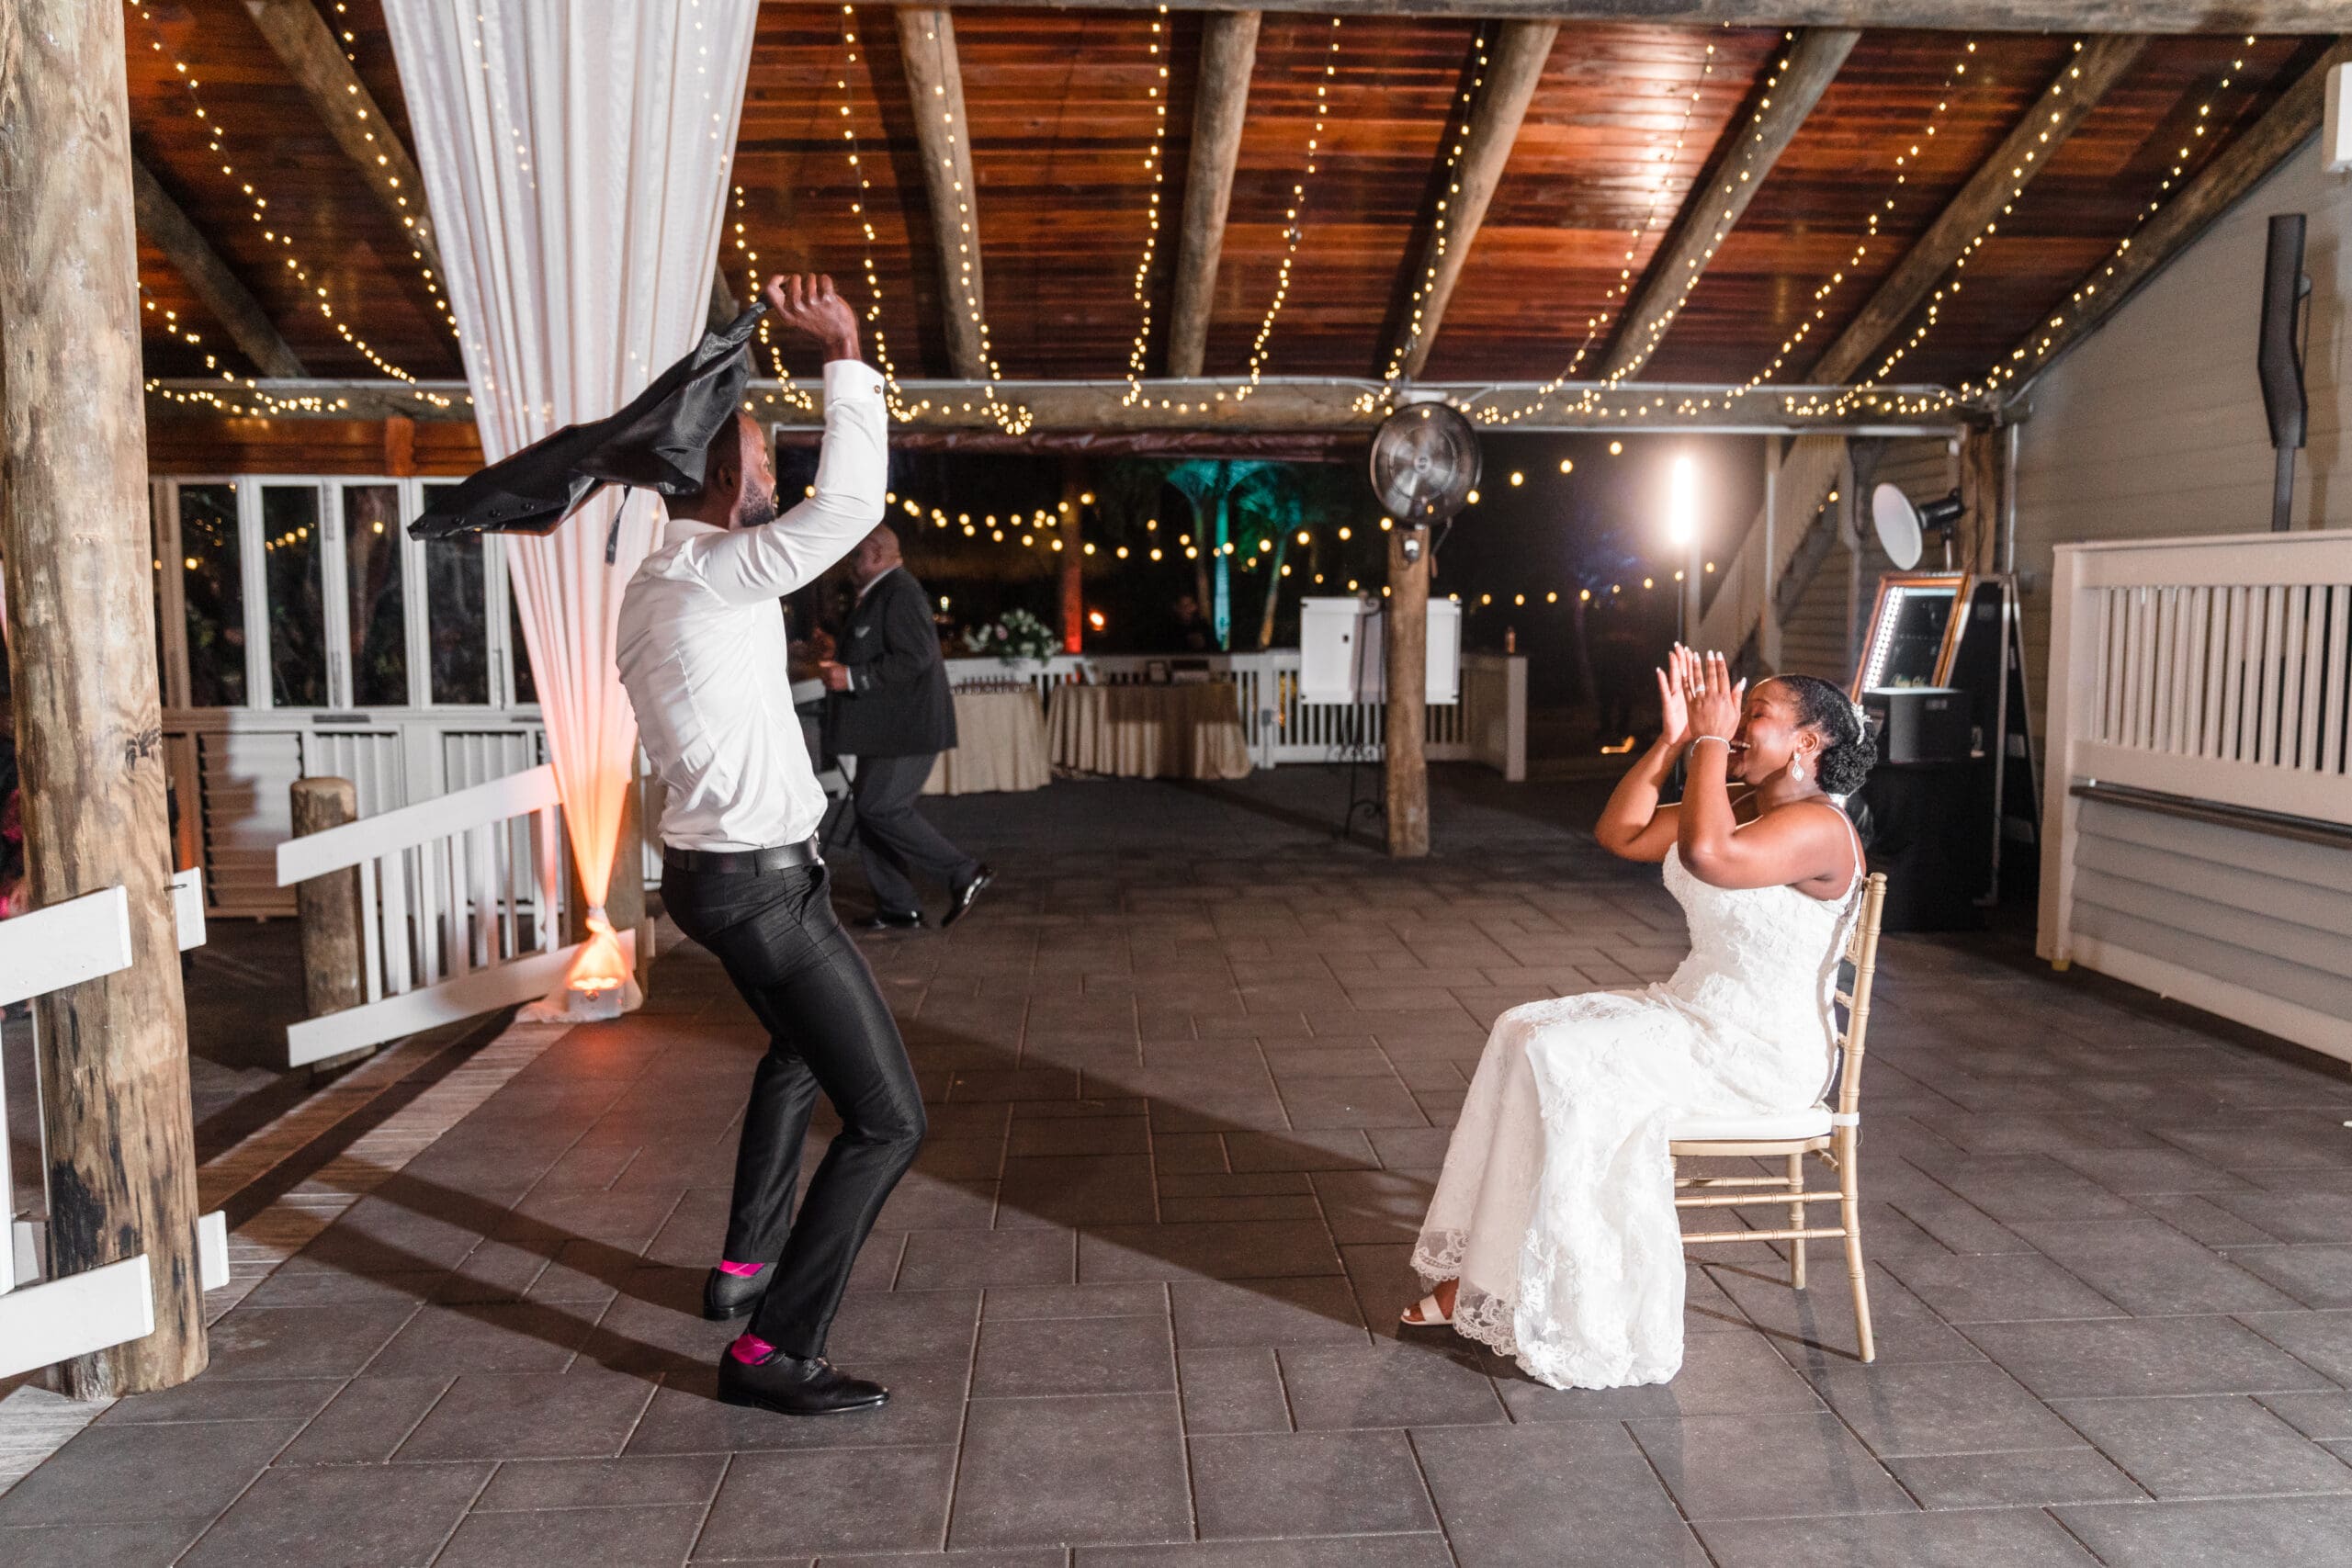 Jamie dancing for Kourtni while she sits, laughing and smiling, as he spins his sports jacket over his head in a dance, captured by Jerzy Nieves Photography.